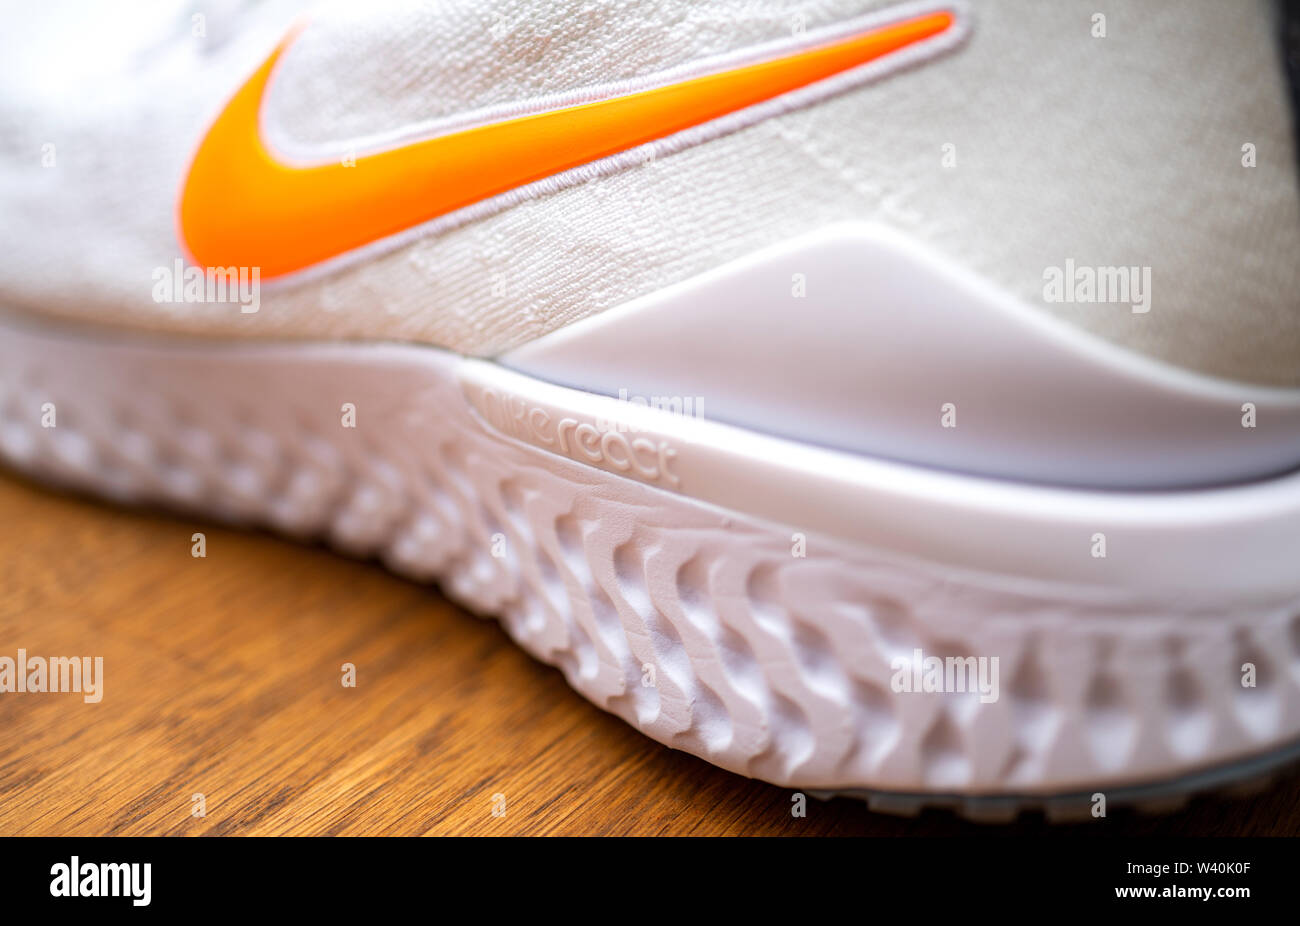 Paris, France - Jul 8, 2019: Side view of new Nike Zoom Fly Flyknit 2  running shoes on wooden table detail of sole and logotype Stock Photo -  Alamy